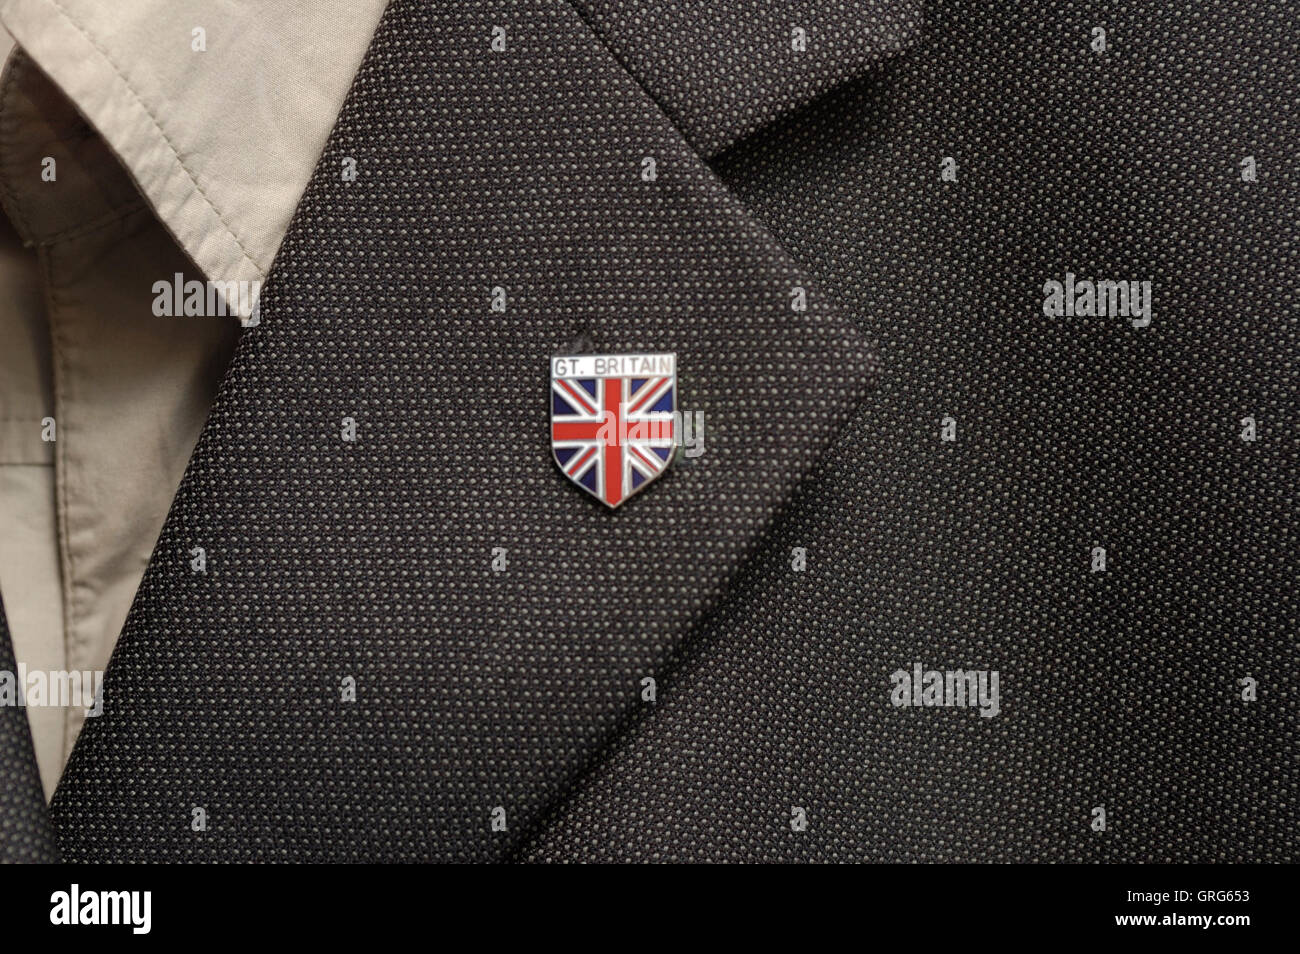 Suit Lapel with Union flag pin badge Stock Photo: 117755375 - Alamy